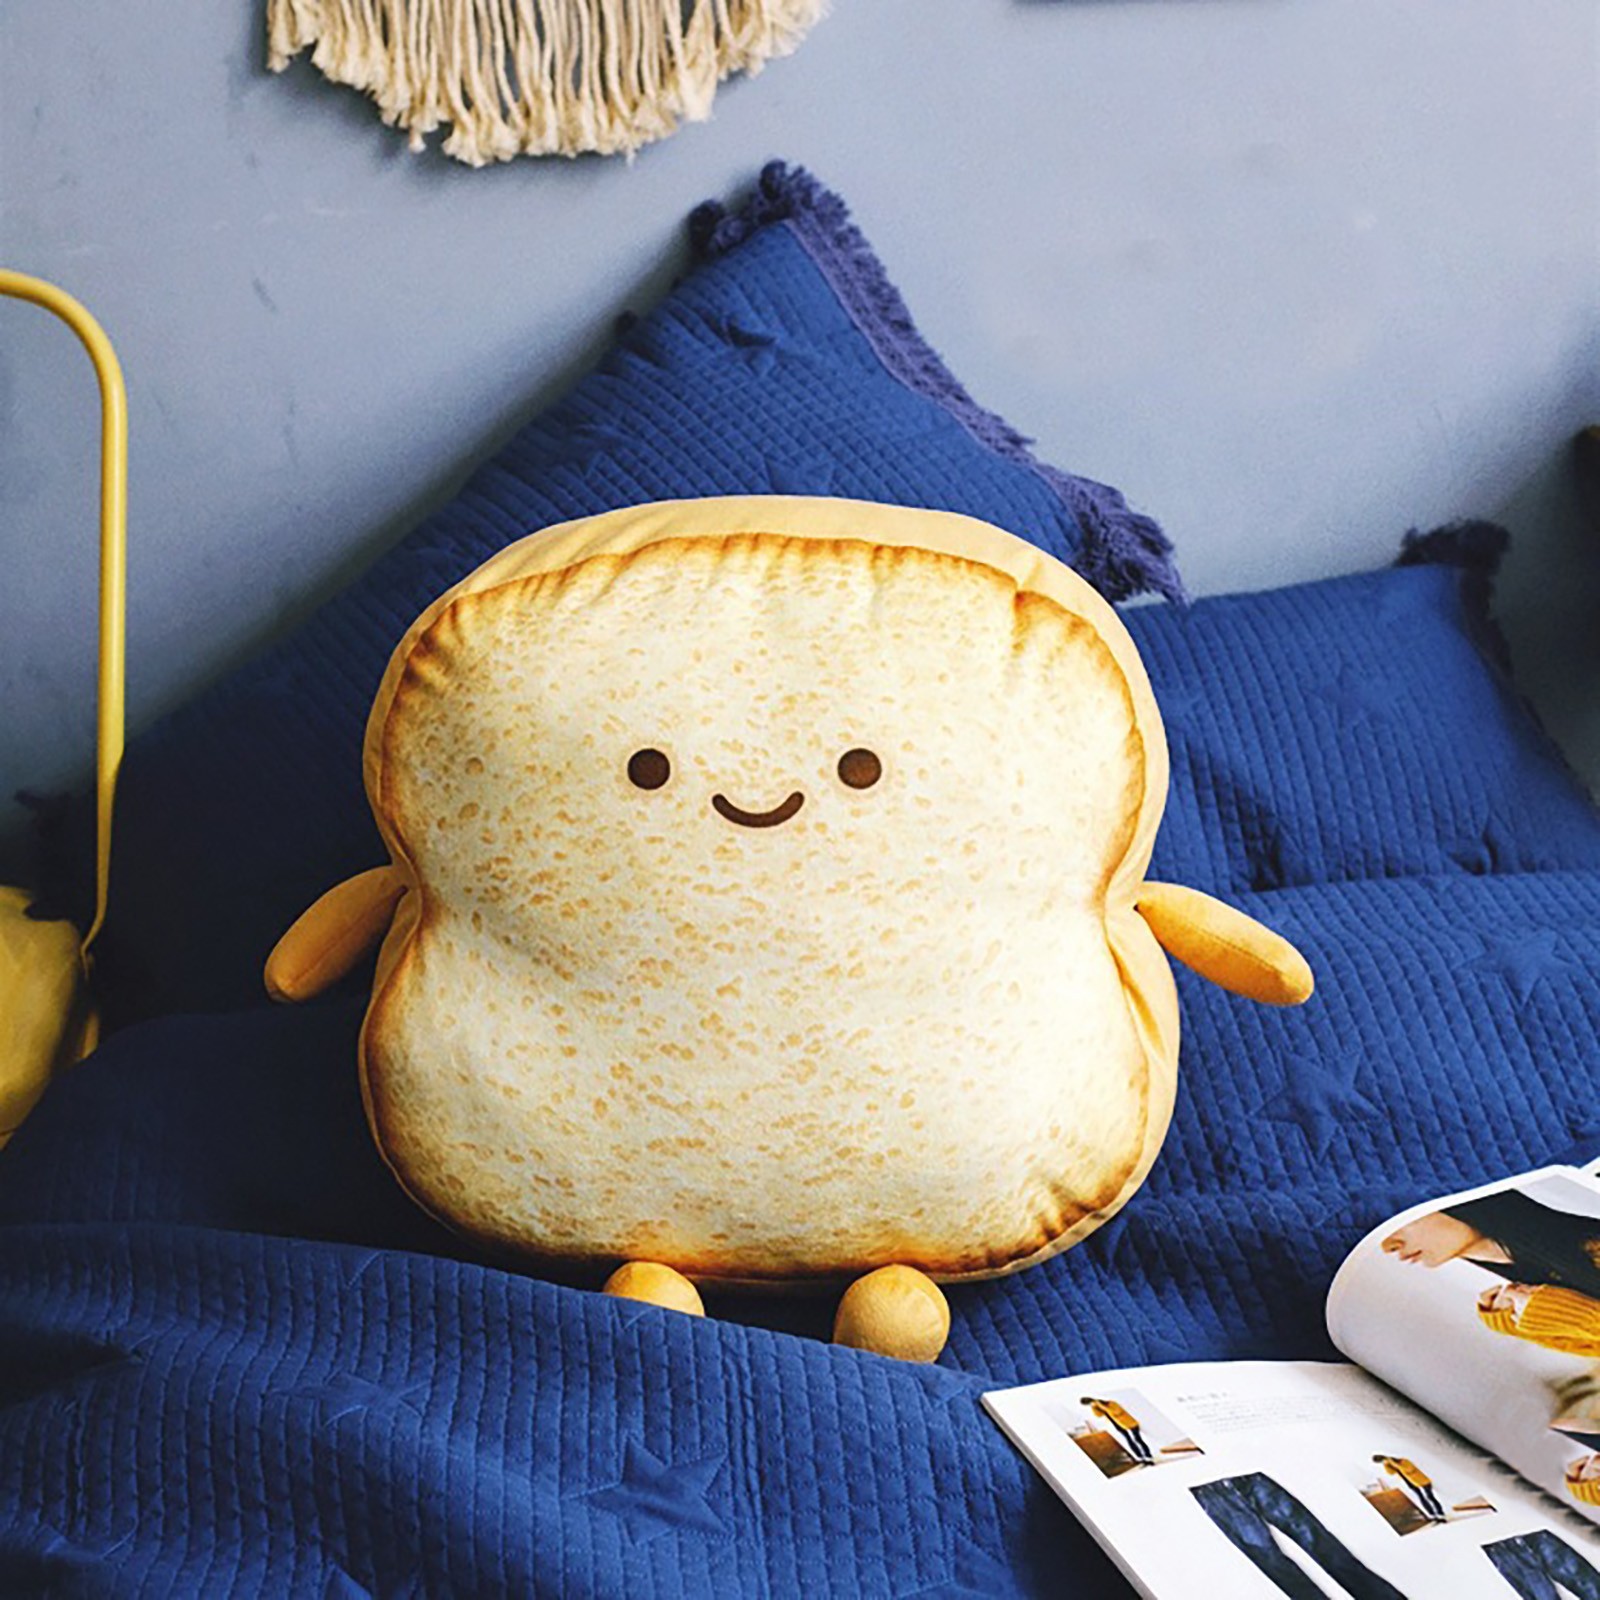 Cartoon Bread Slice Pillow Lovely Stuffed Toast Doll Kids Toys For Children Adult Gift Home Bedroom Decoration Car Waist Cushion